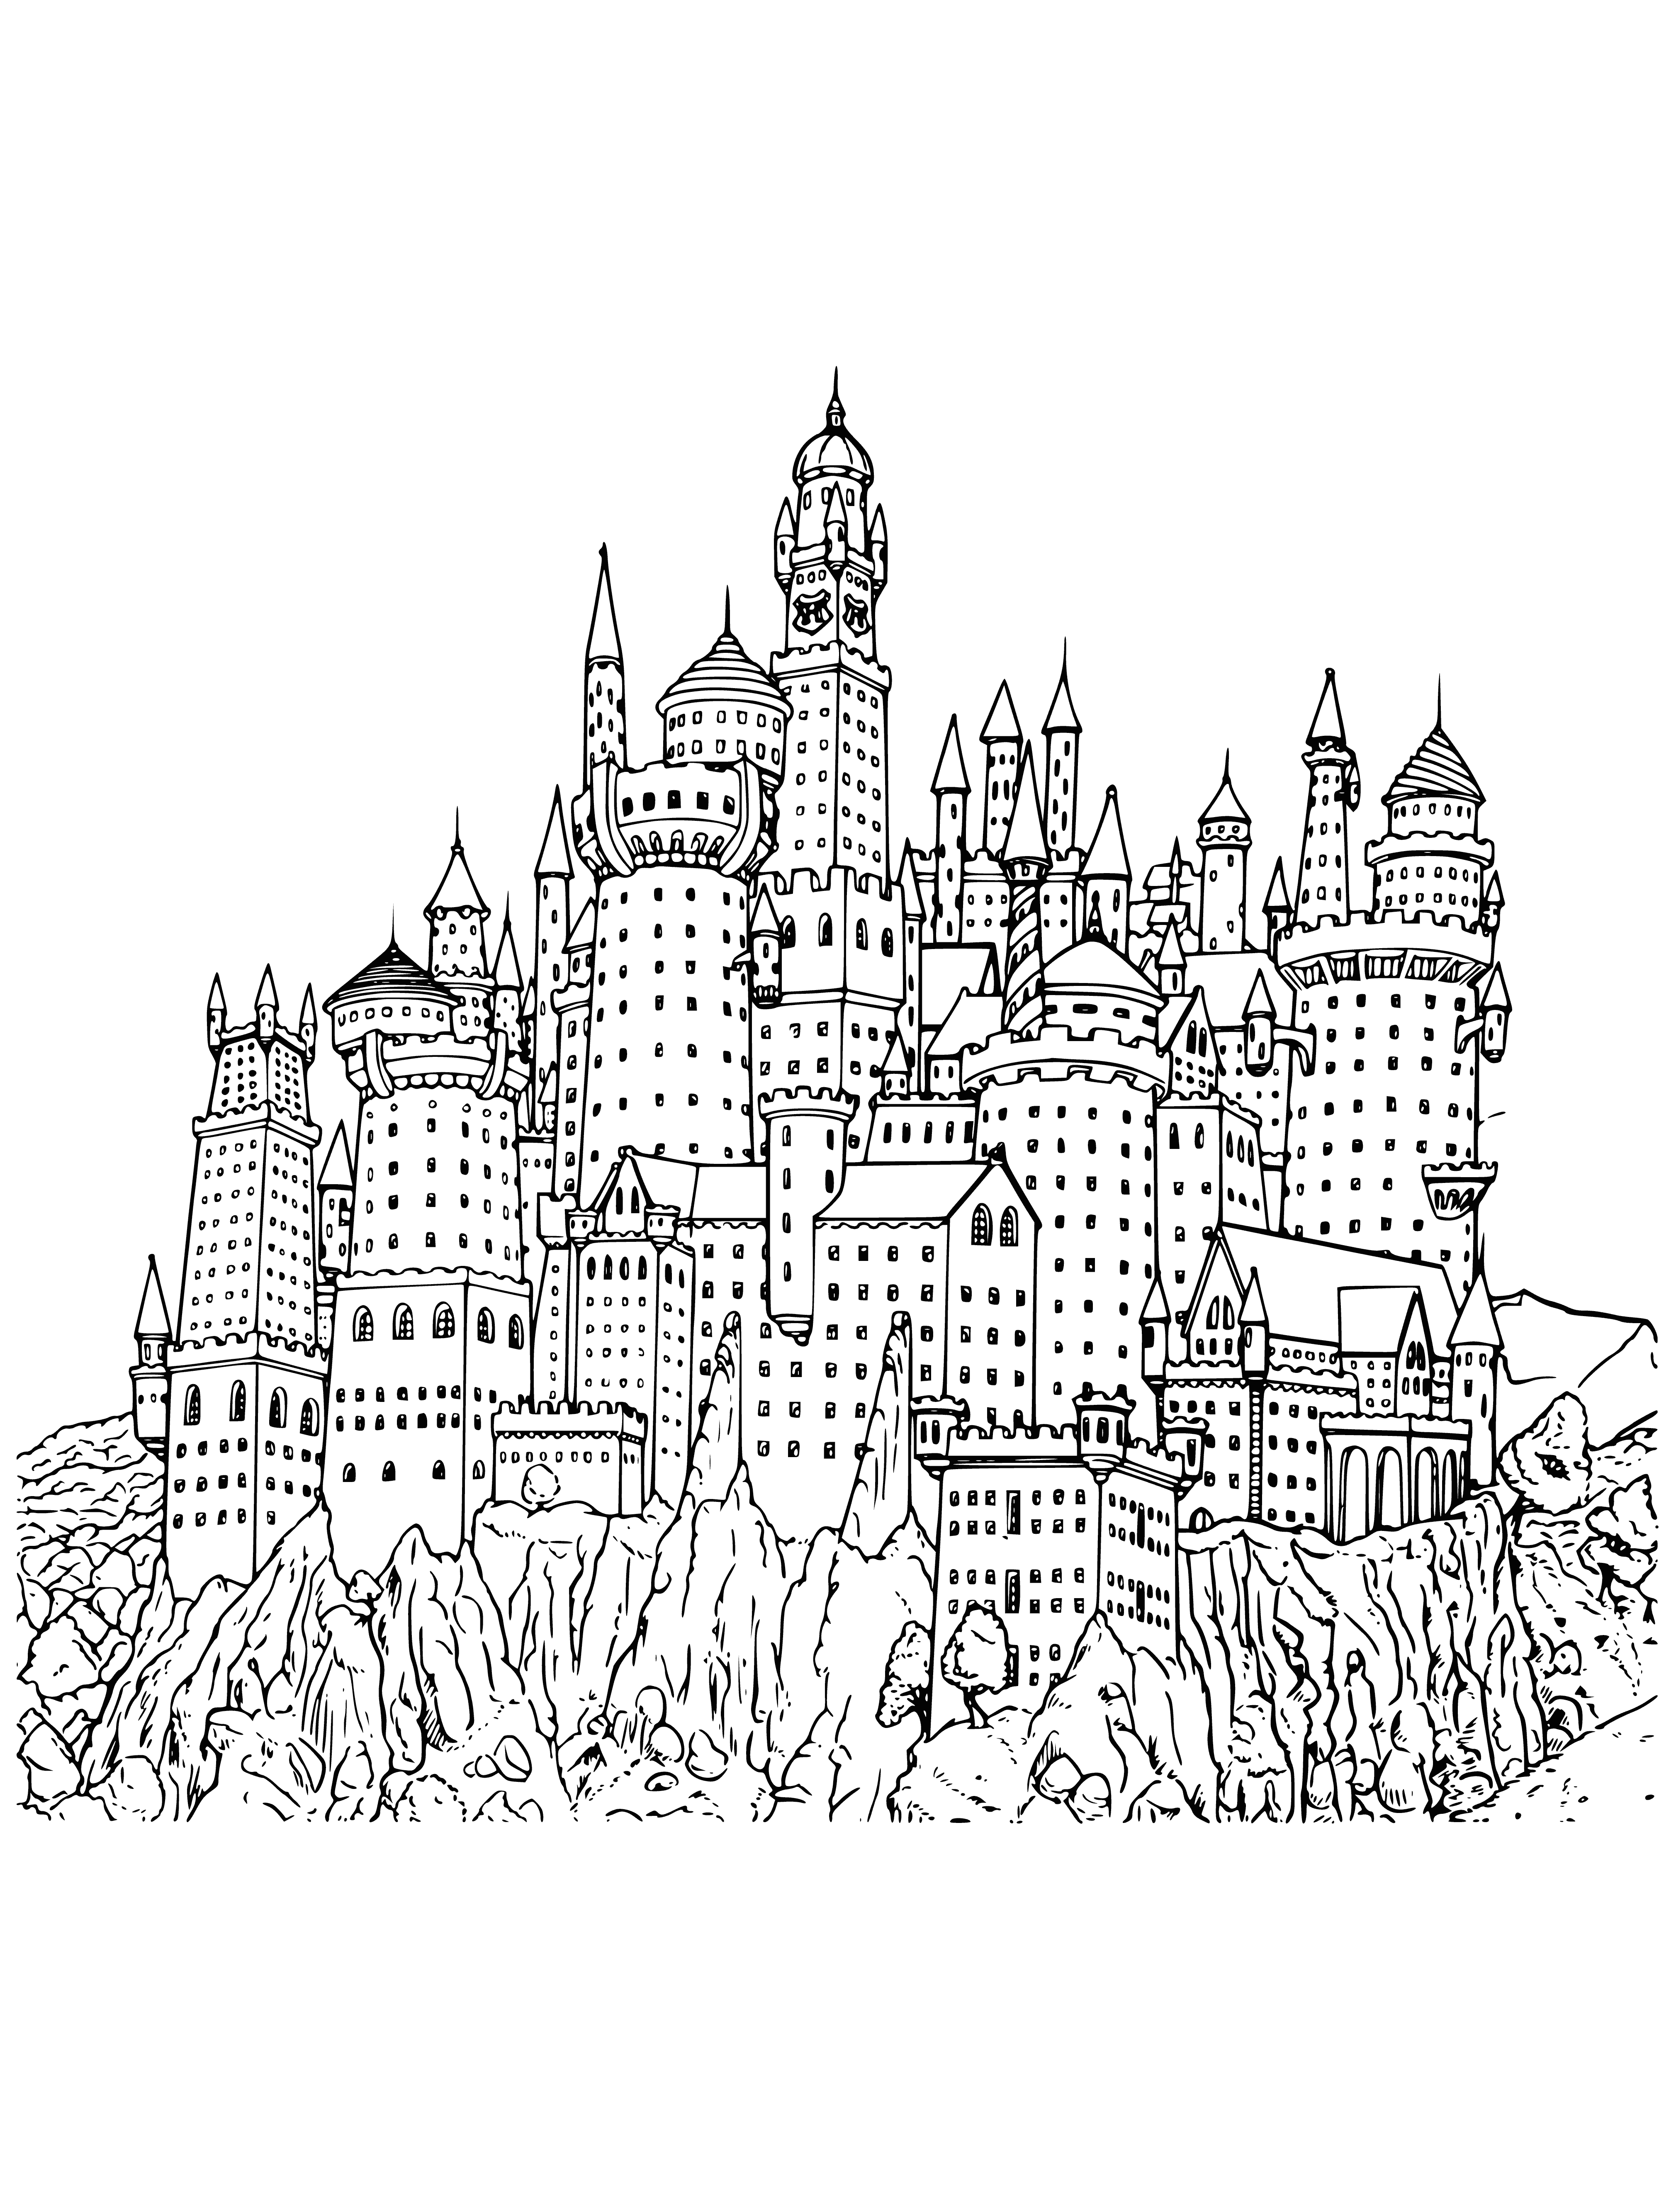 coloring page: Hogwarts Castle is a large castle with towers, turrets, a courtyard, a lake, and many students and teachers. #harrypotter